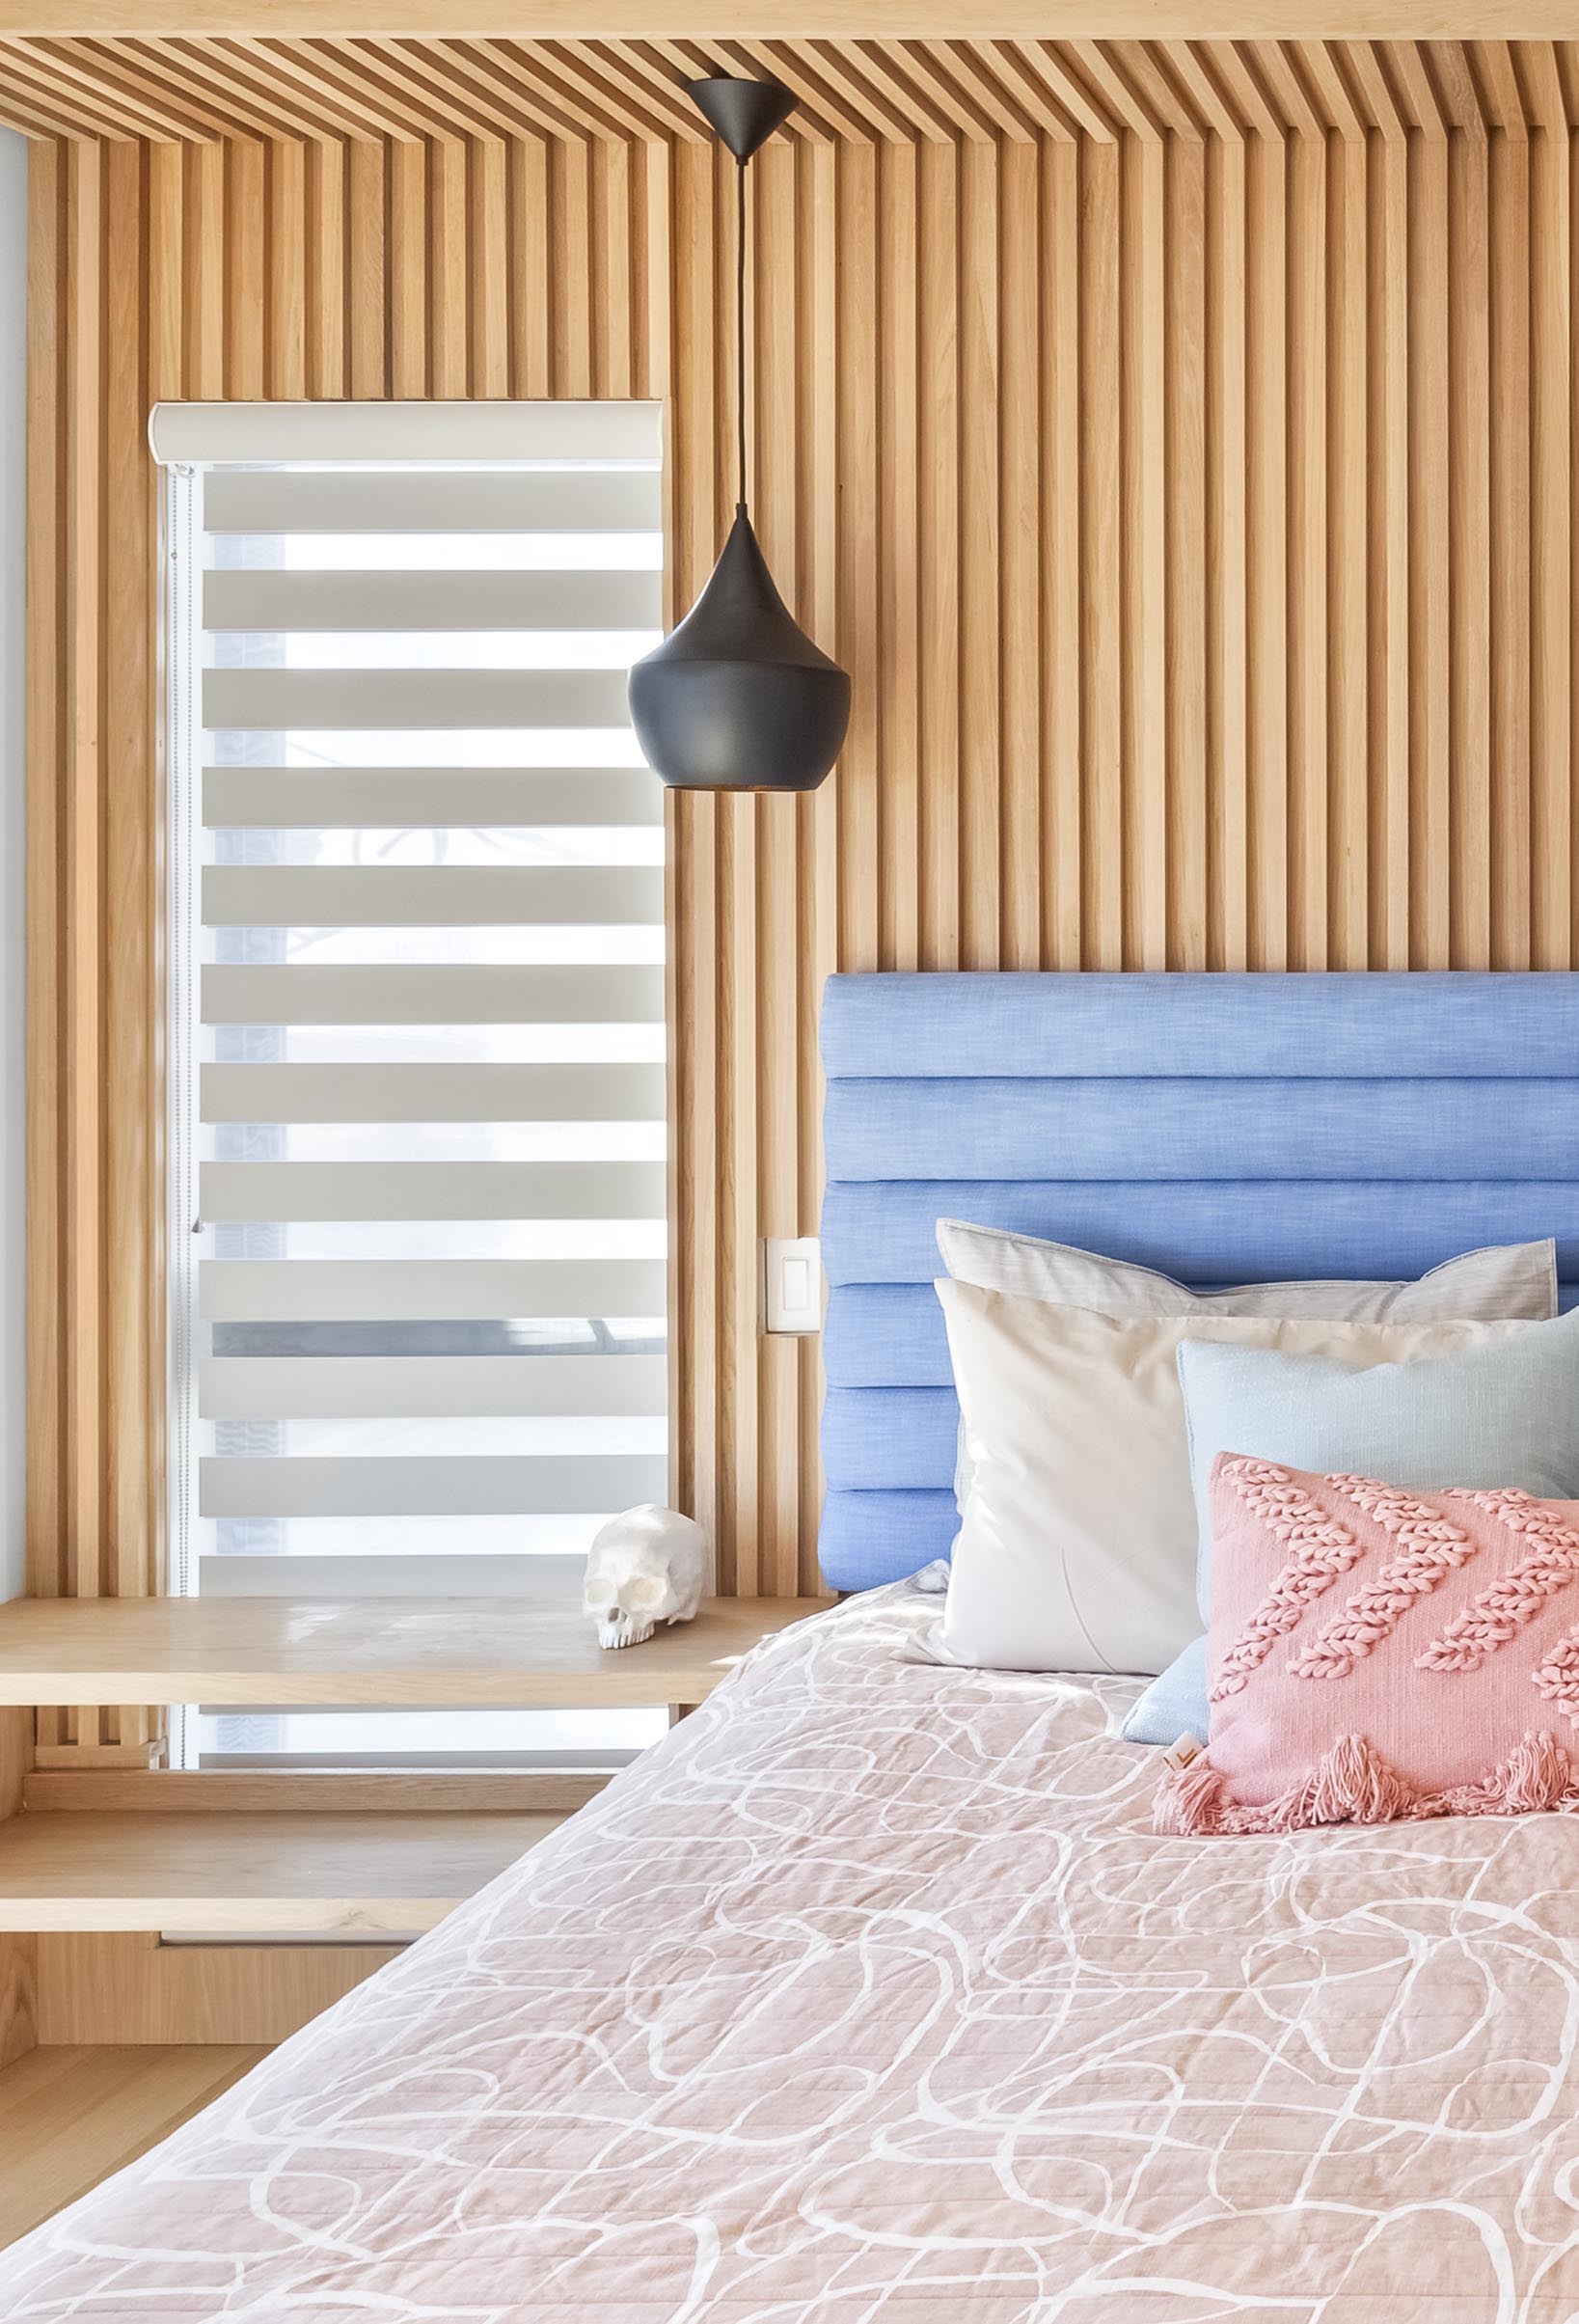 A wood accent wall with vertical slats.